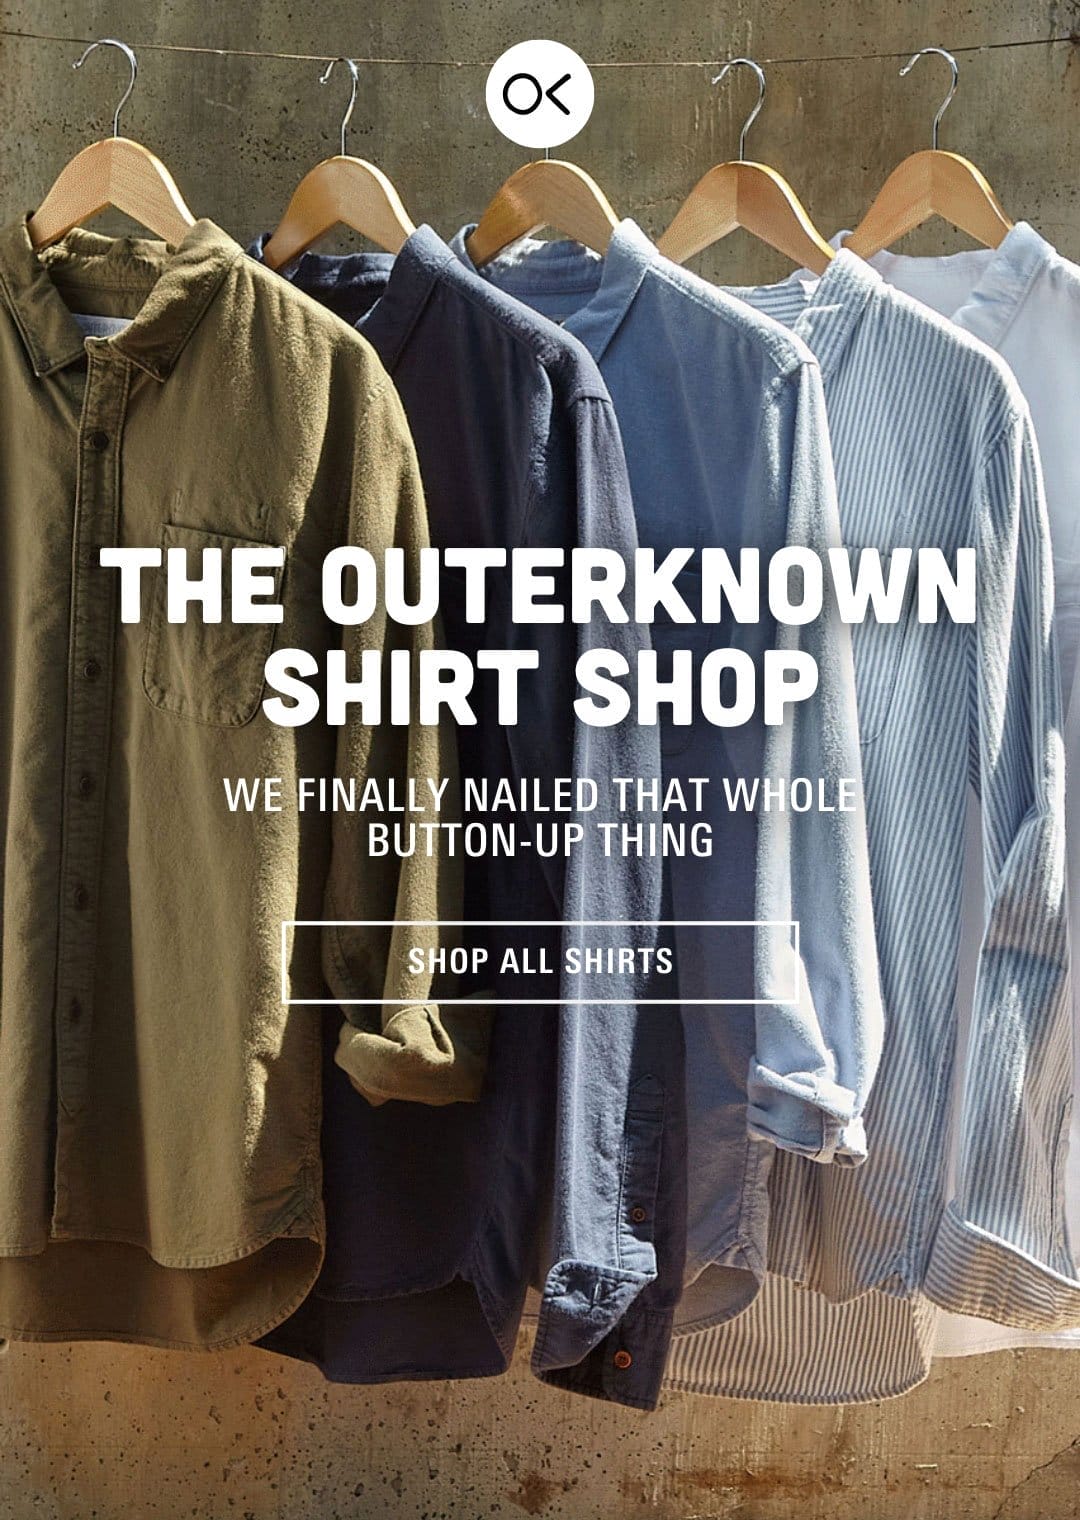 The Outerknown Shirt Shop